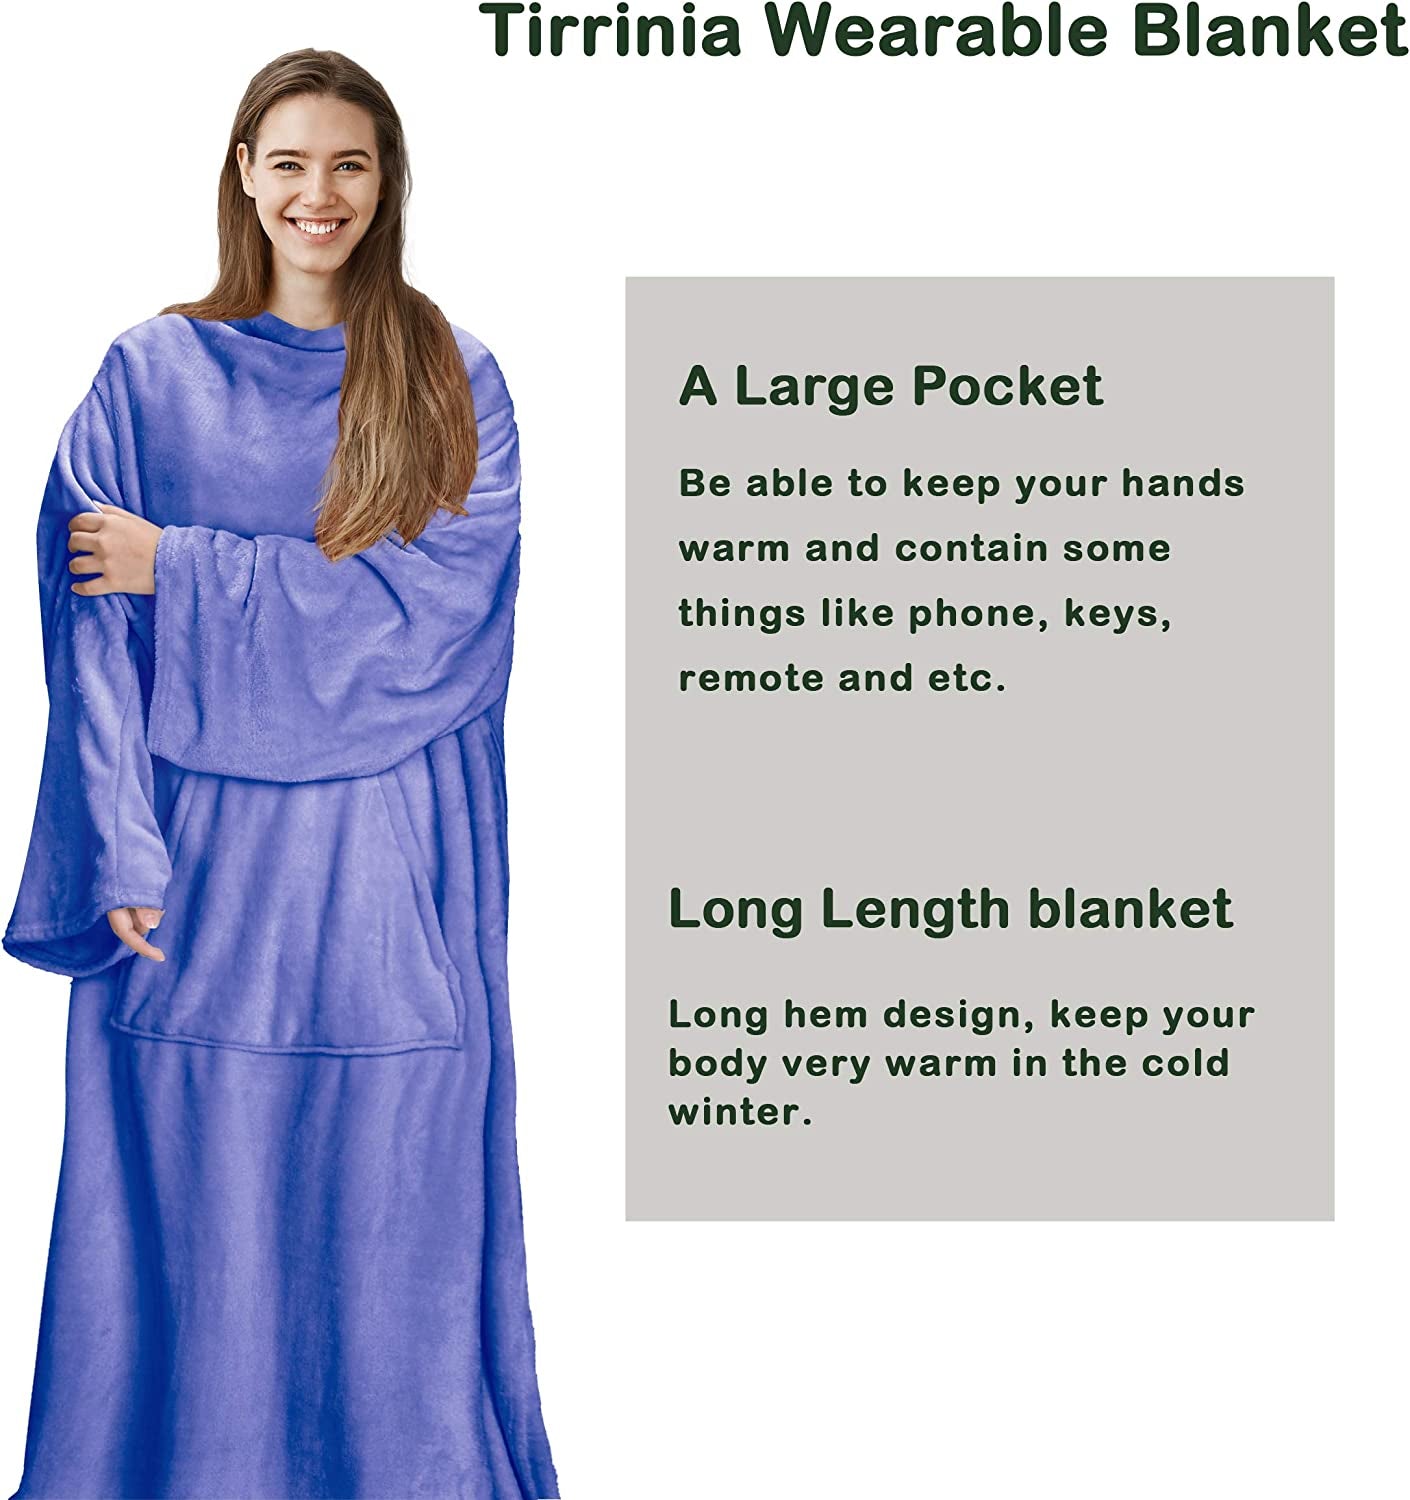 Fleece Blanket with Sleeves, Wearable Blanket with Snap Button, Cozy Soft Warm TV Blanket, Body Blanket with Front Pocket, Gift for Adults, Women, Father, All Seasons